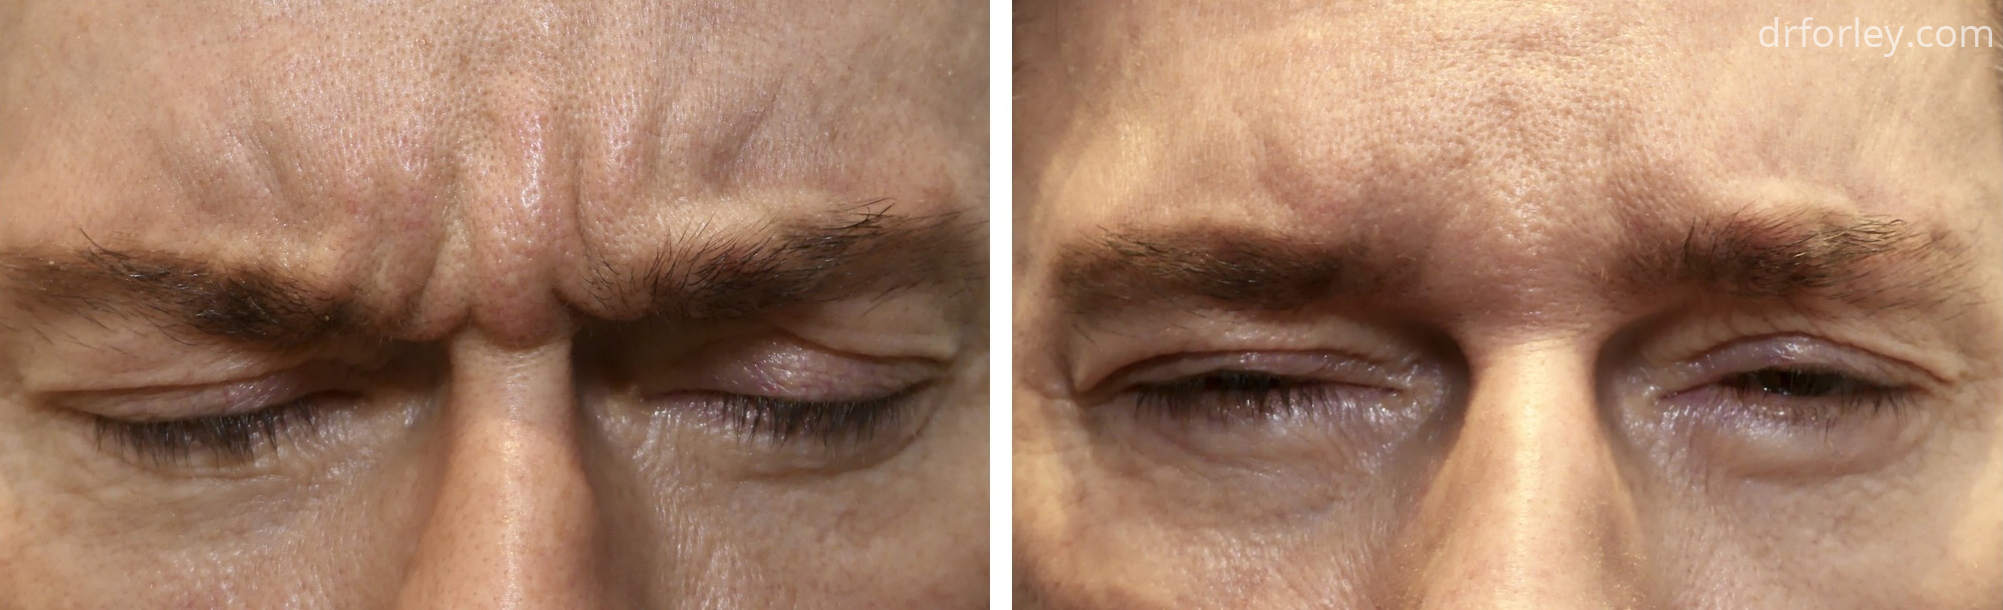 Male face, before and after BOTOX treatment, front view, patient 10